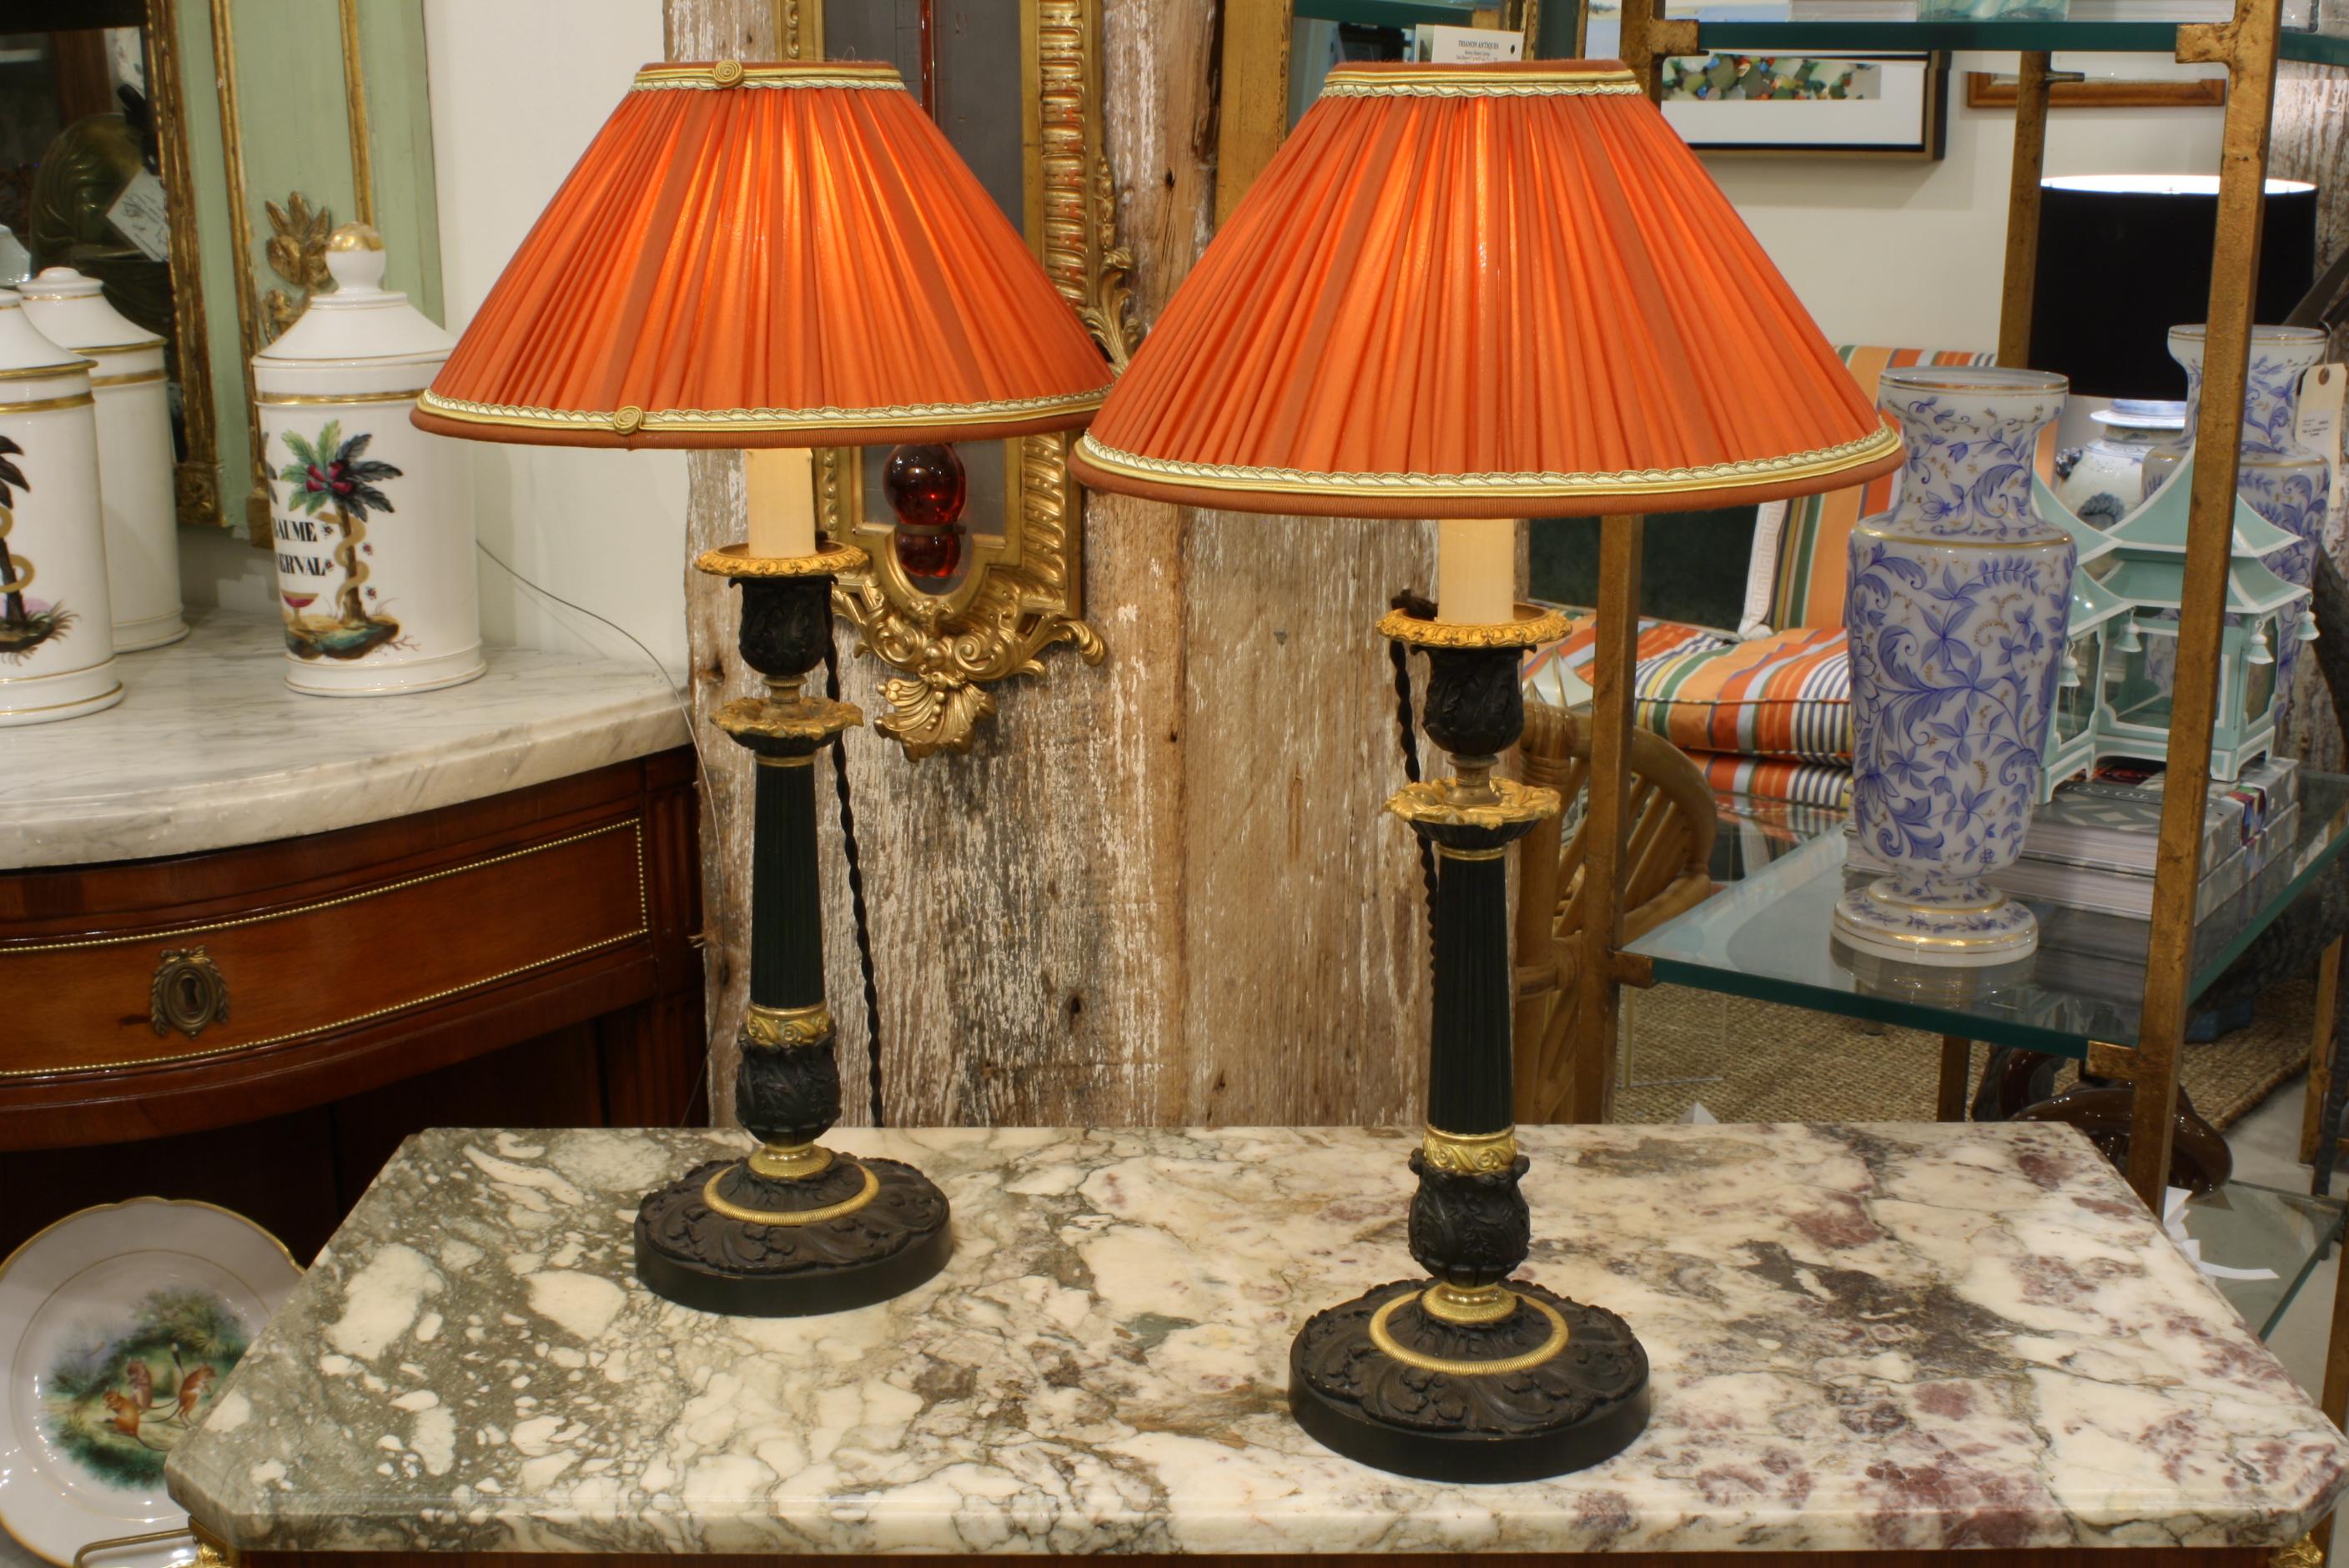 Pair of handsome 19th century French gilt bronze and patinated bronze candlesticks in the restoration style. The candlesticks have been wired as lamps and fitted with pleated orange silk shades with trim and 